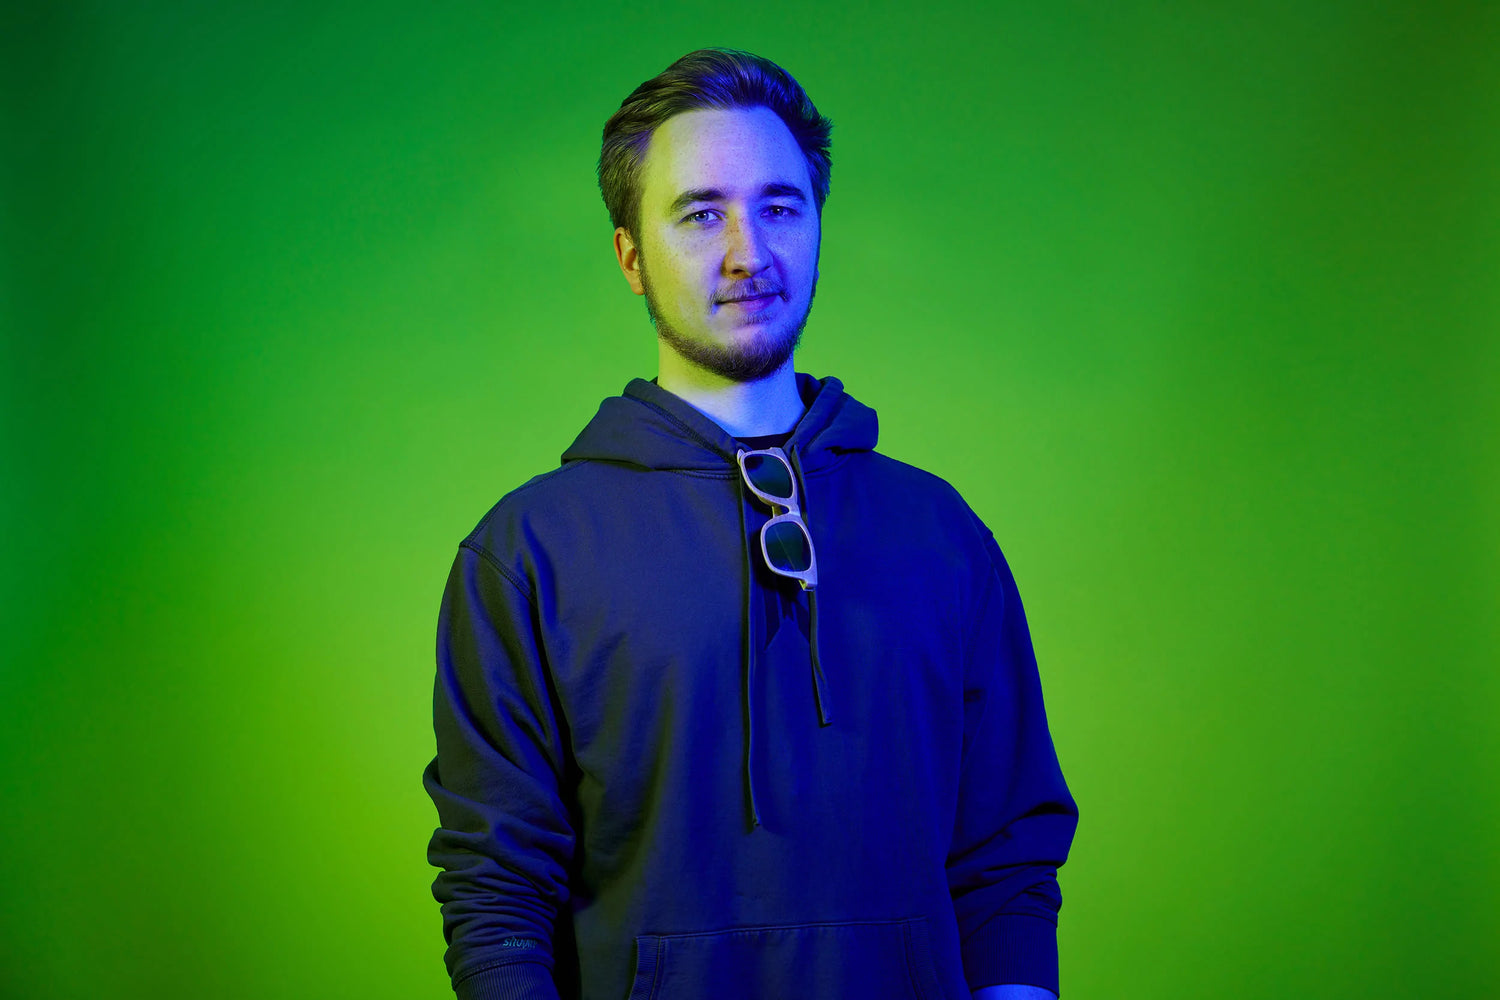 Player (Lambo) with a Rebellion hoodie and a green background